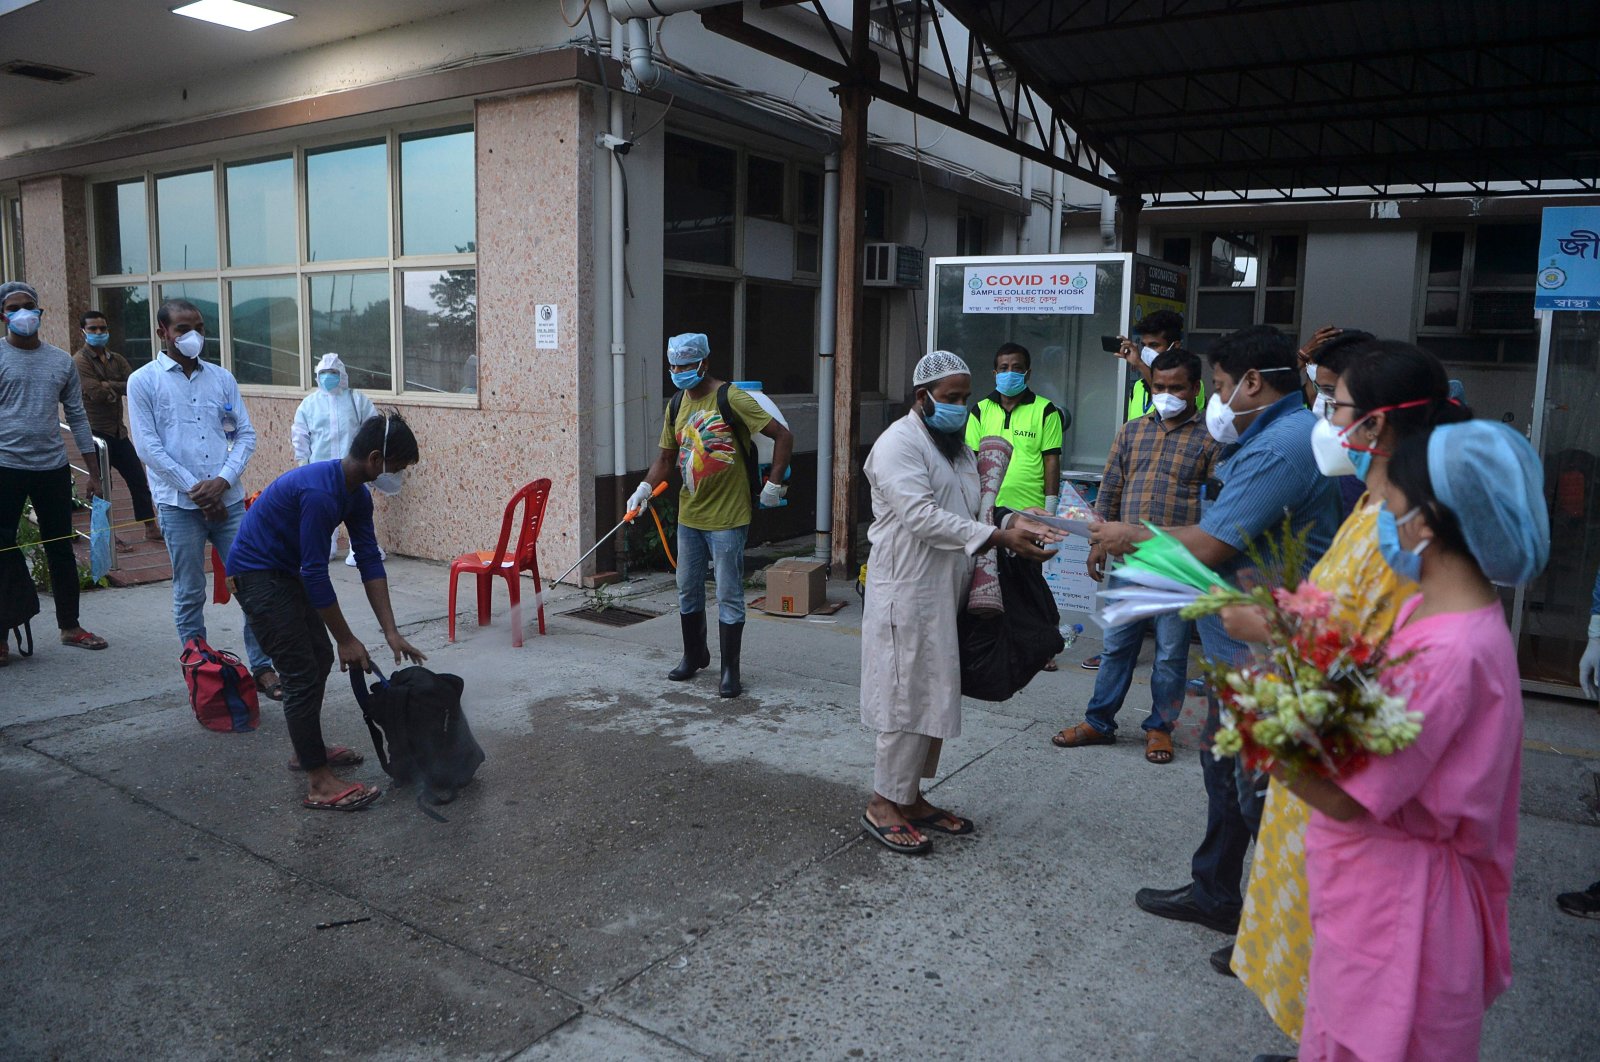 Recovered COVID-19 patients collect certificates from hospital staff as they leave a hospital in Siliguri on June 2, 2020. (AFP Photo)